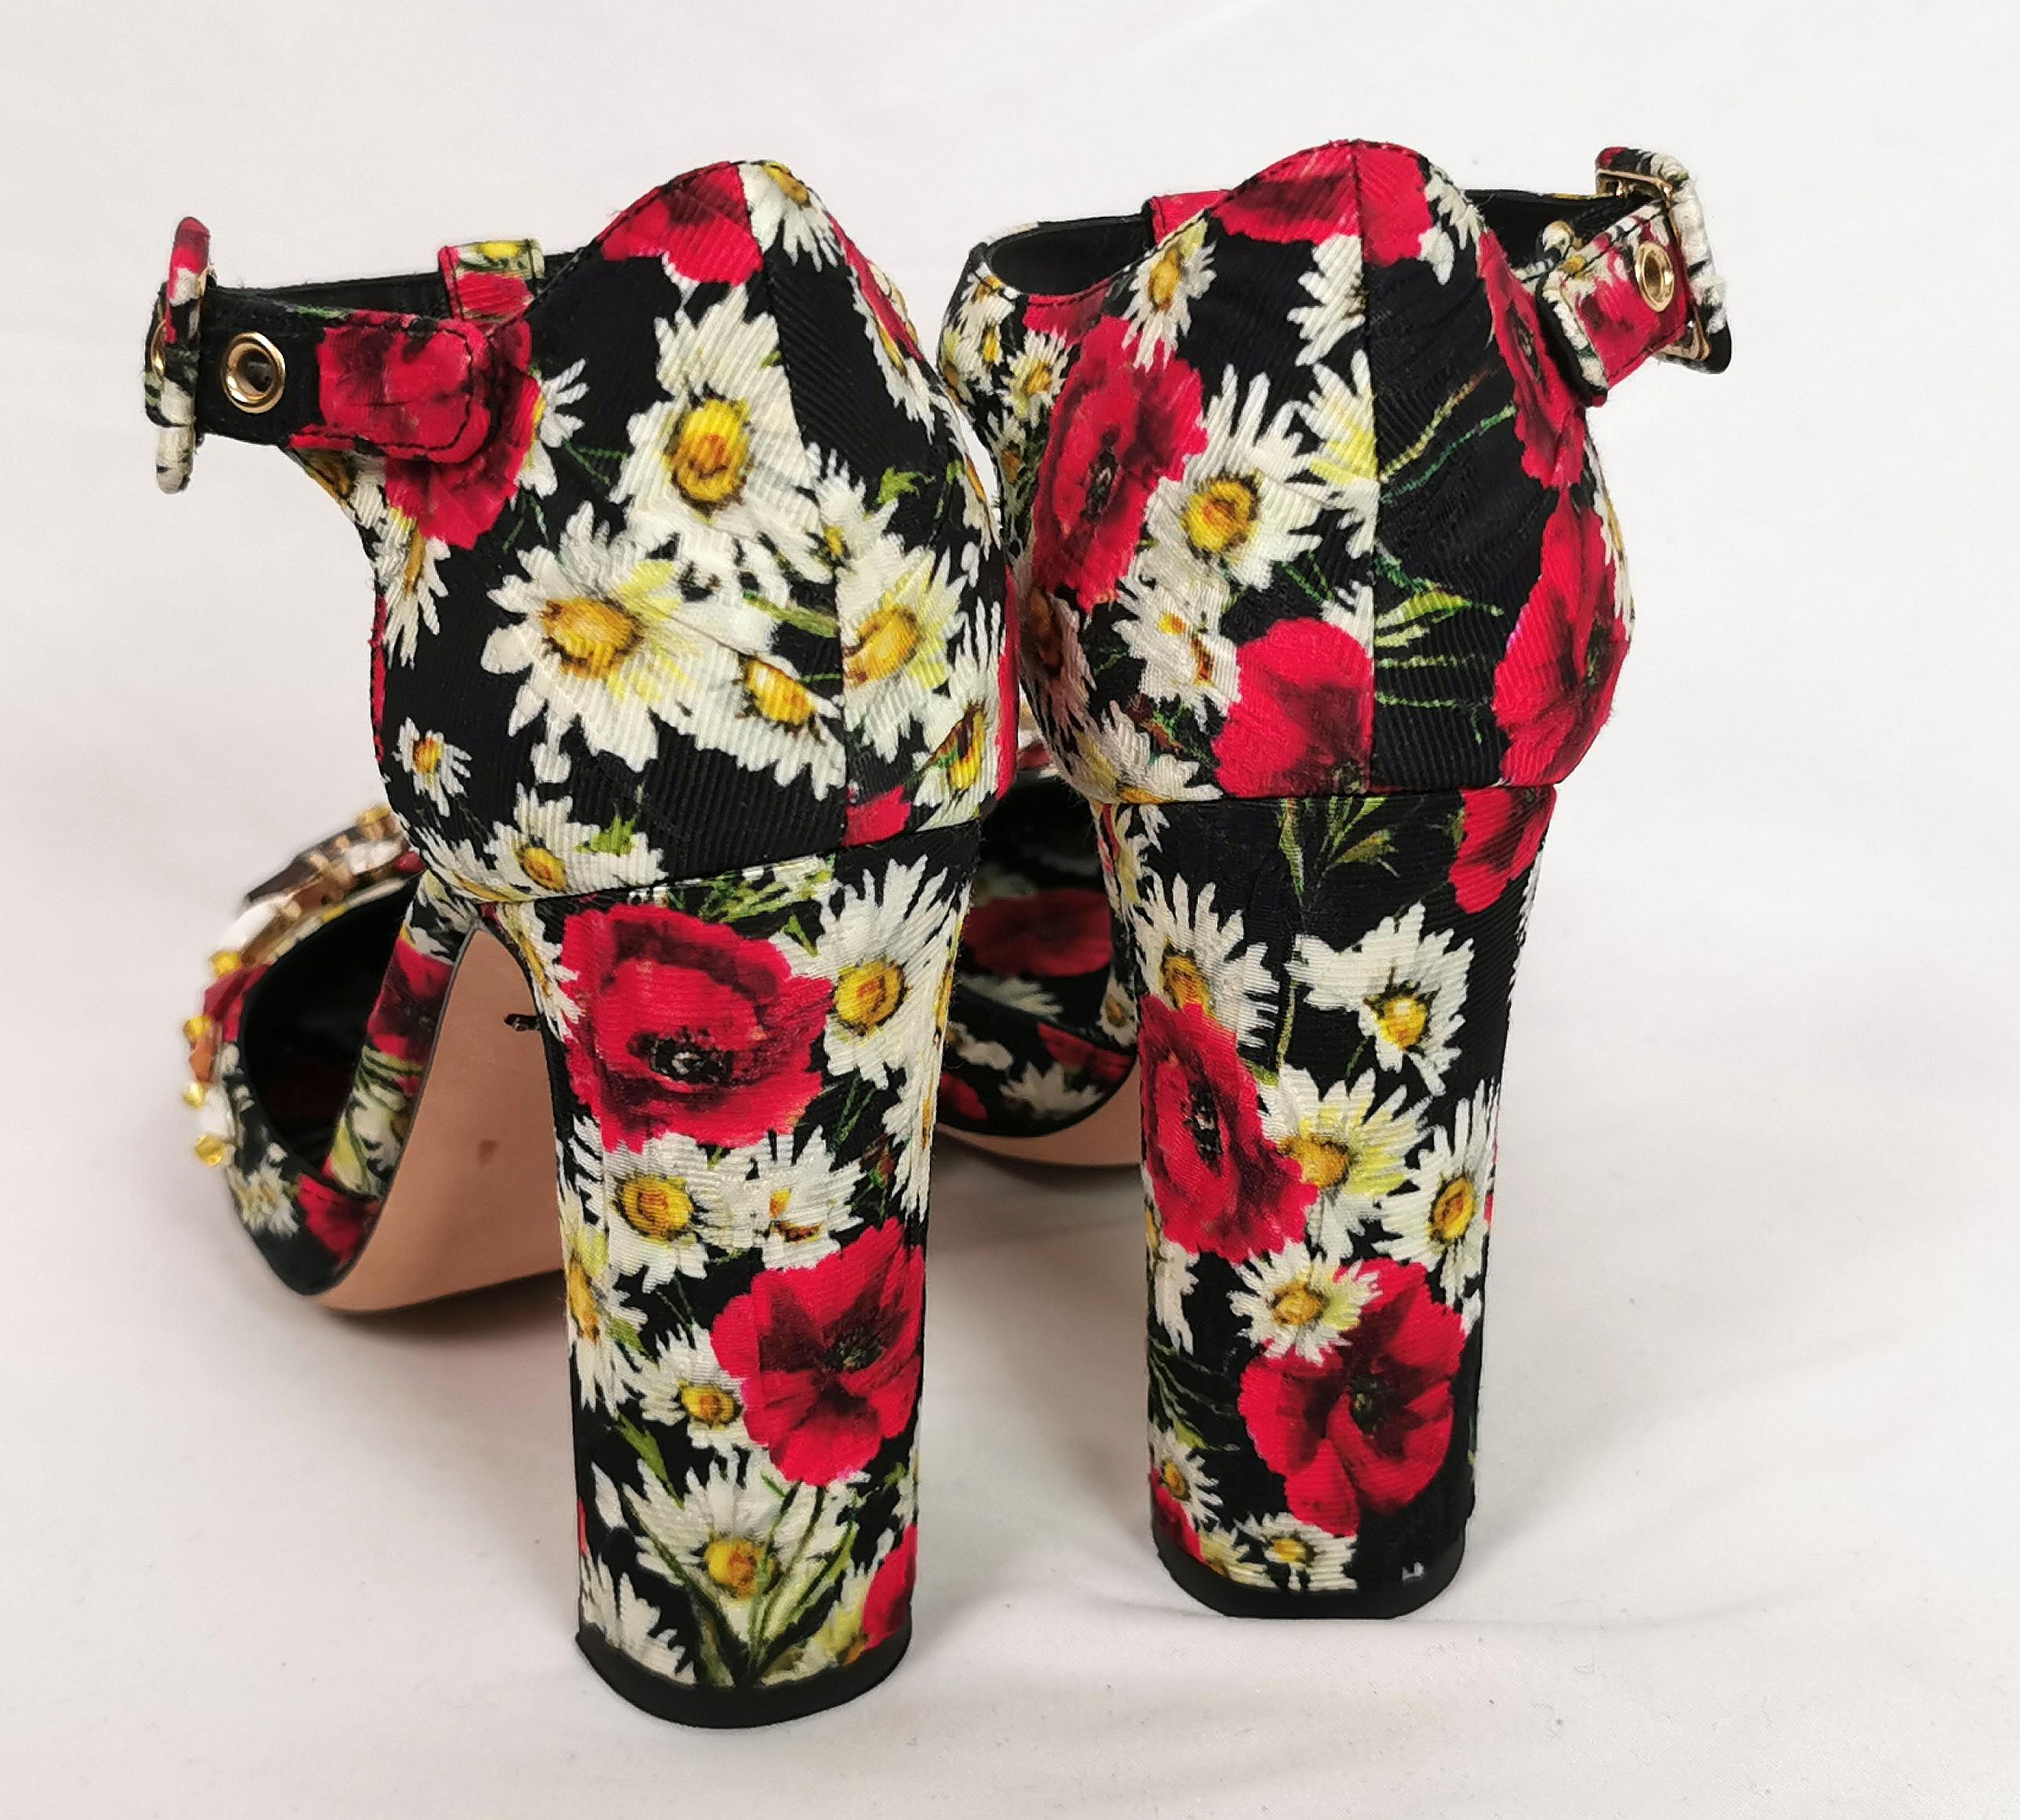 Dolce and Gabbana floral jewelled heeled sandals, Poppy and Daisy shoes  7